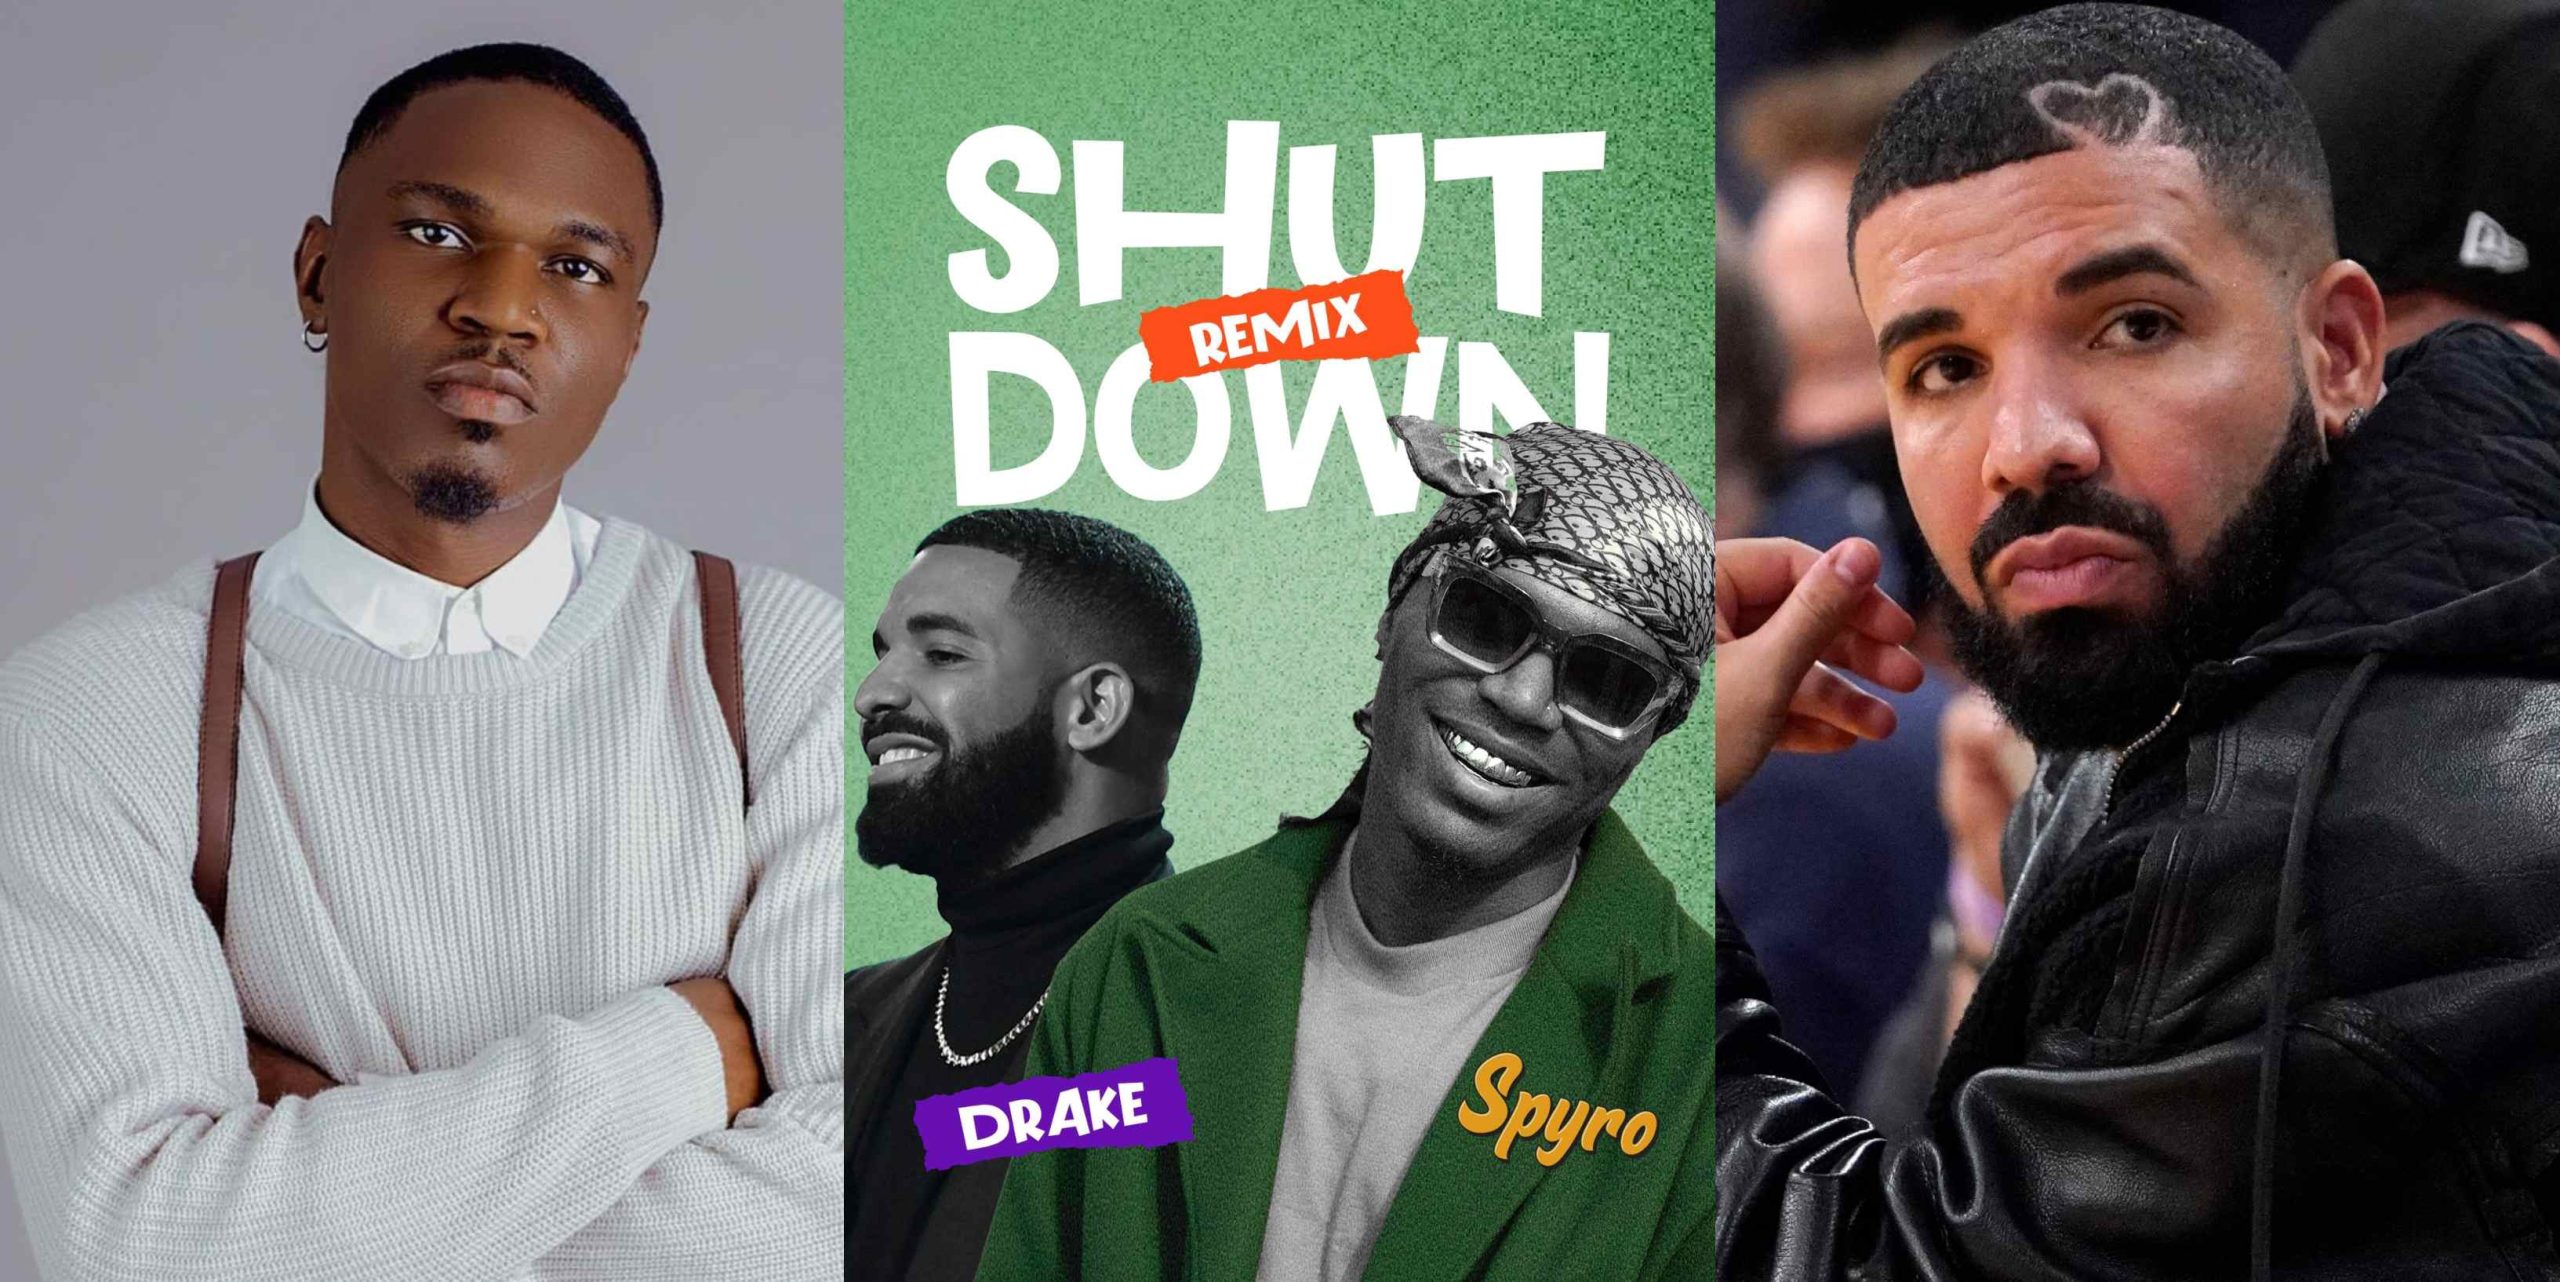 Singer Spyro reportedly set to collaborate with Drake on Shut Down remix